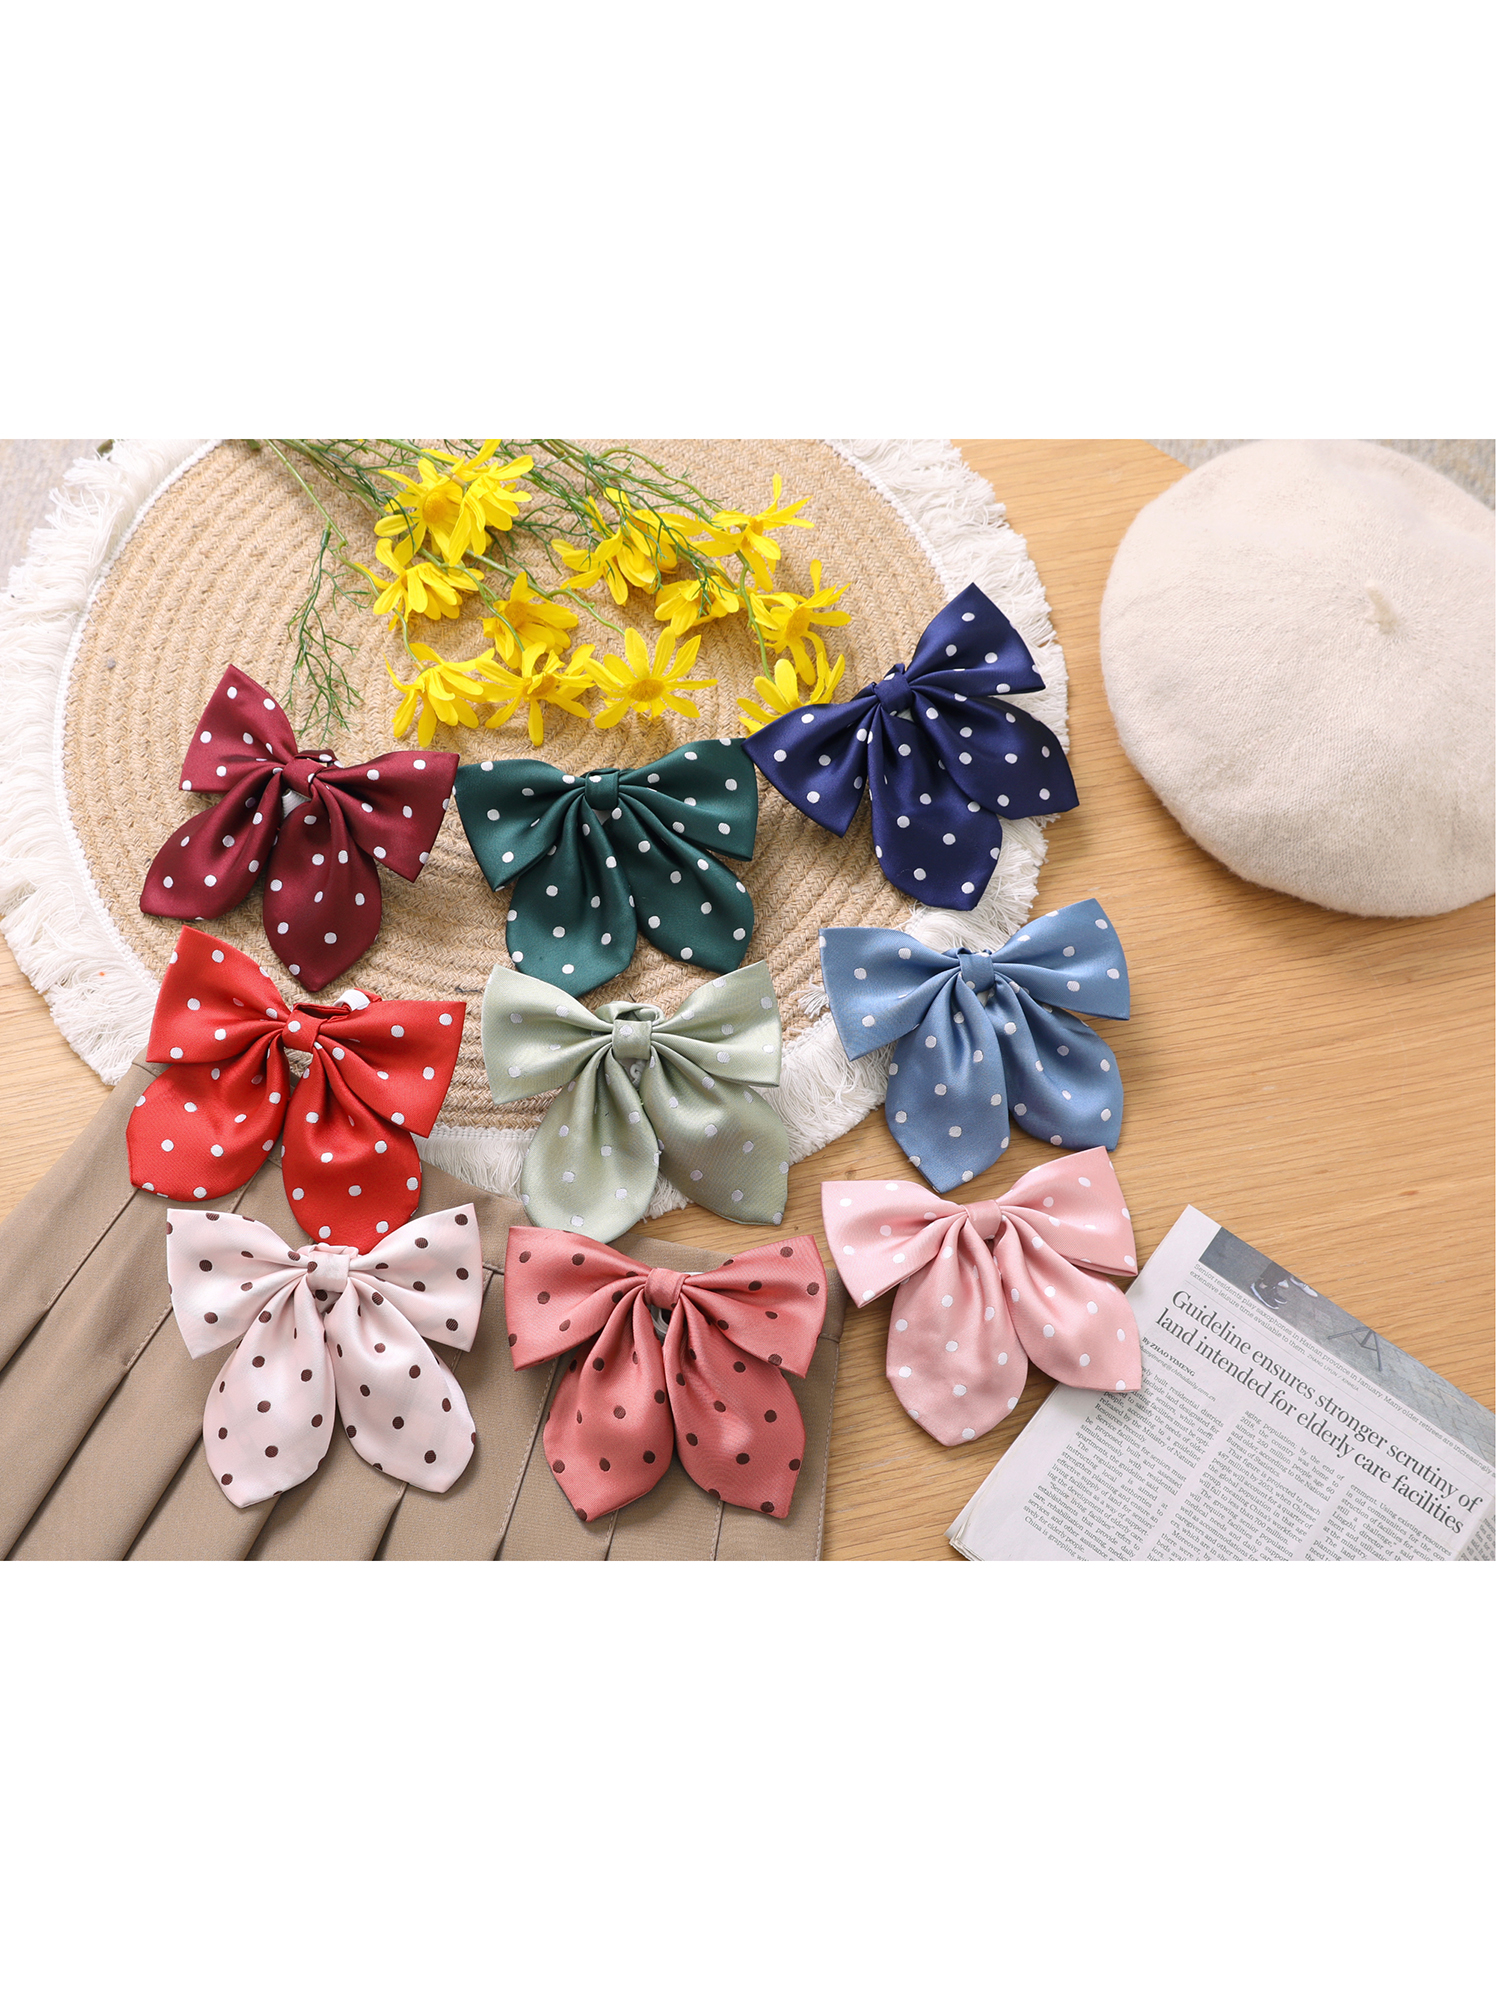 Elerevyo Women's Cute Ribbon Bow Ties Polka Dots Adjustable Straps for School Casual, Size: One Size